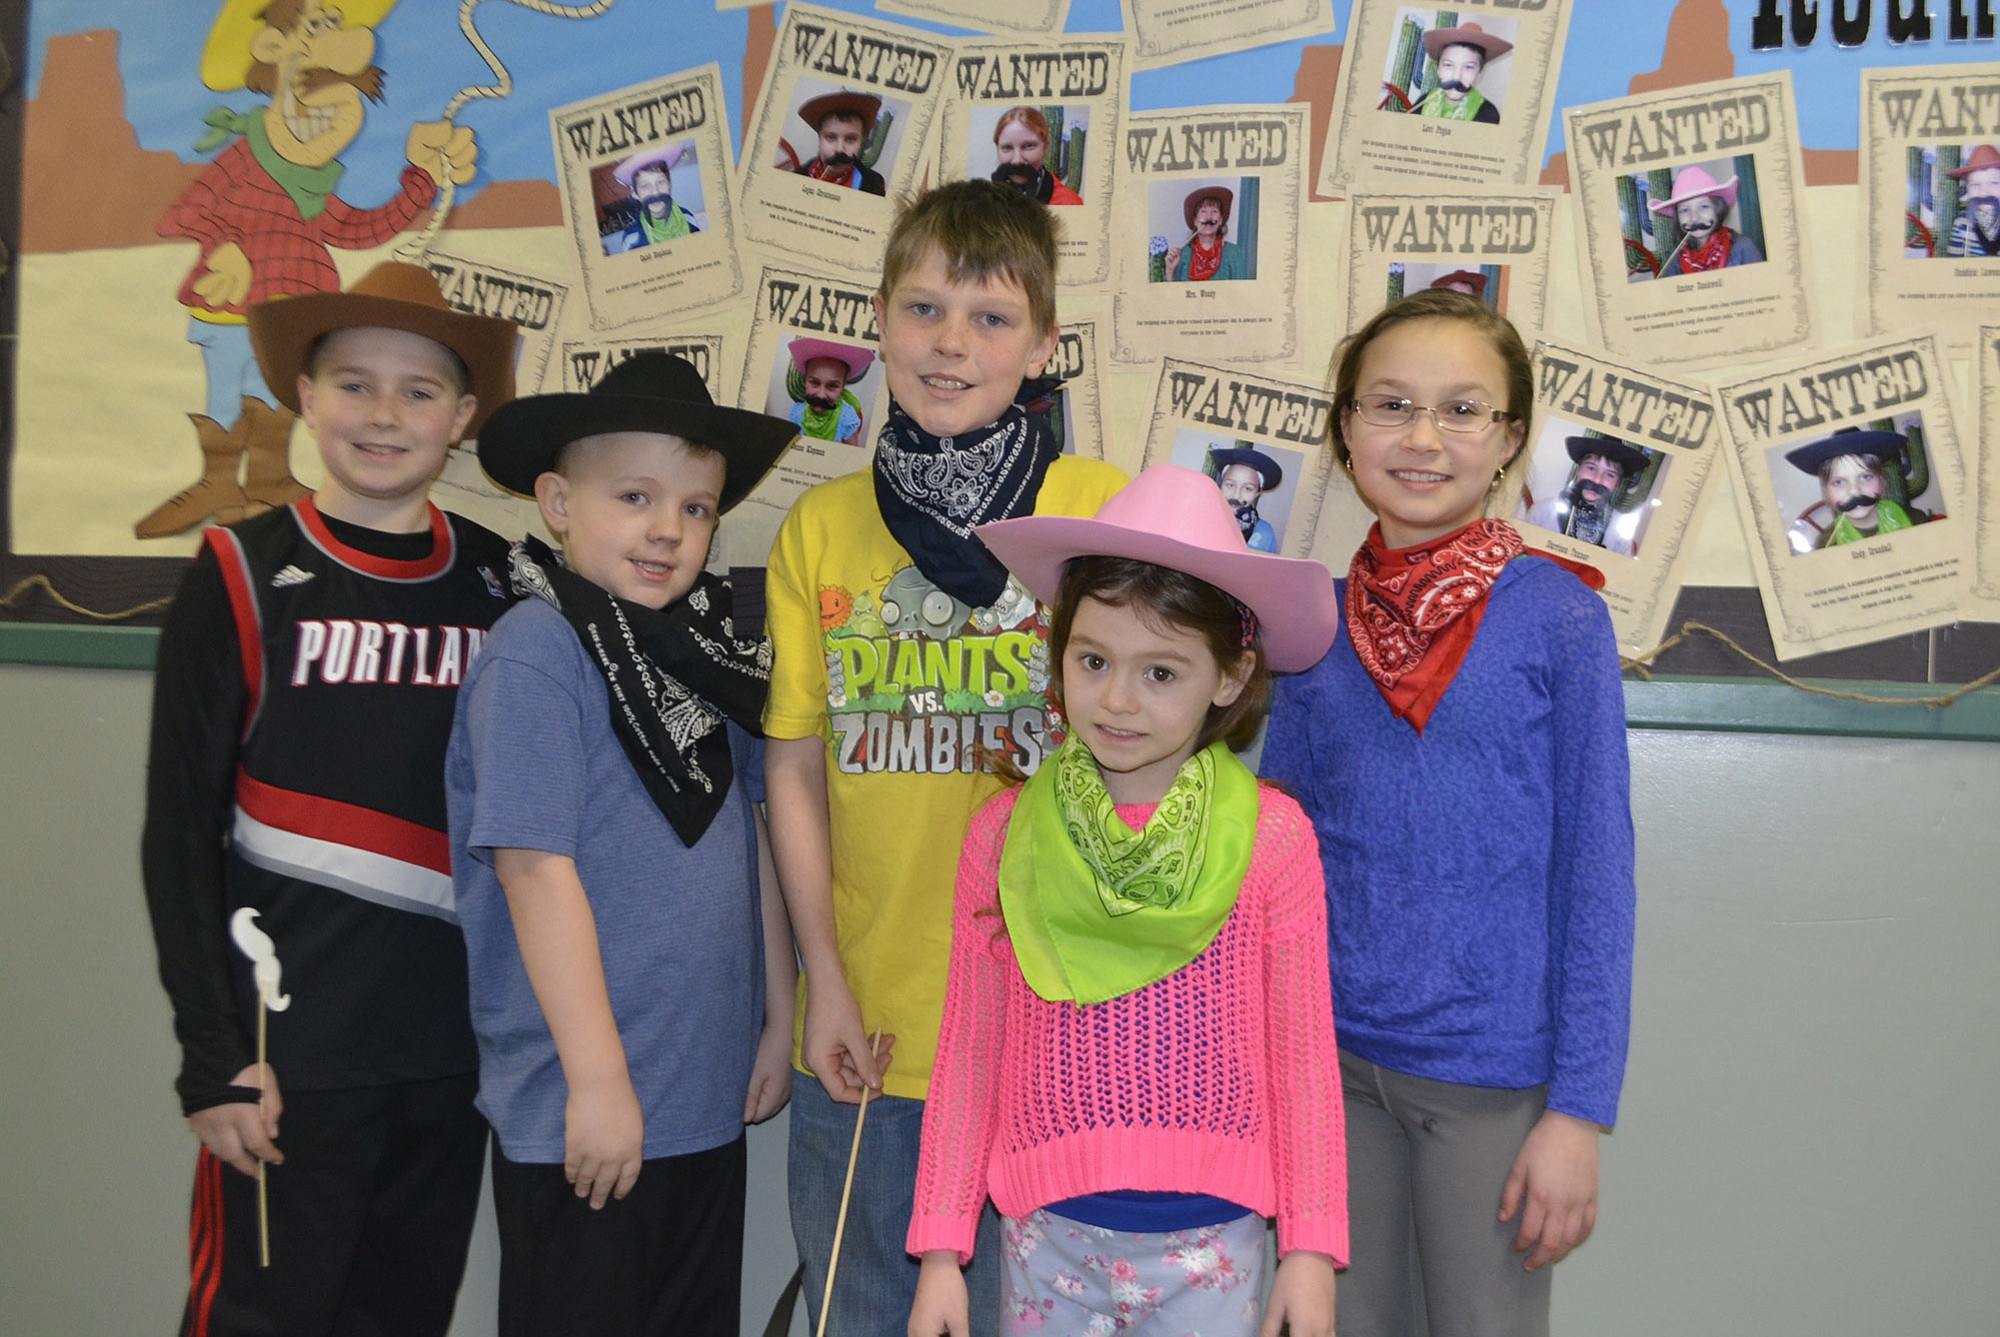 Washougal: Cape Horn-Skye Elementary students Harrison Tanner, Rainen Pratt, Alric Keller, Caitlyn Buck, Taylor Rhodig were recognized during a Random Acts of Kindness Roundup for their recent behavior.